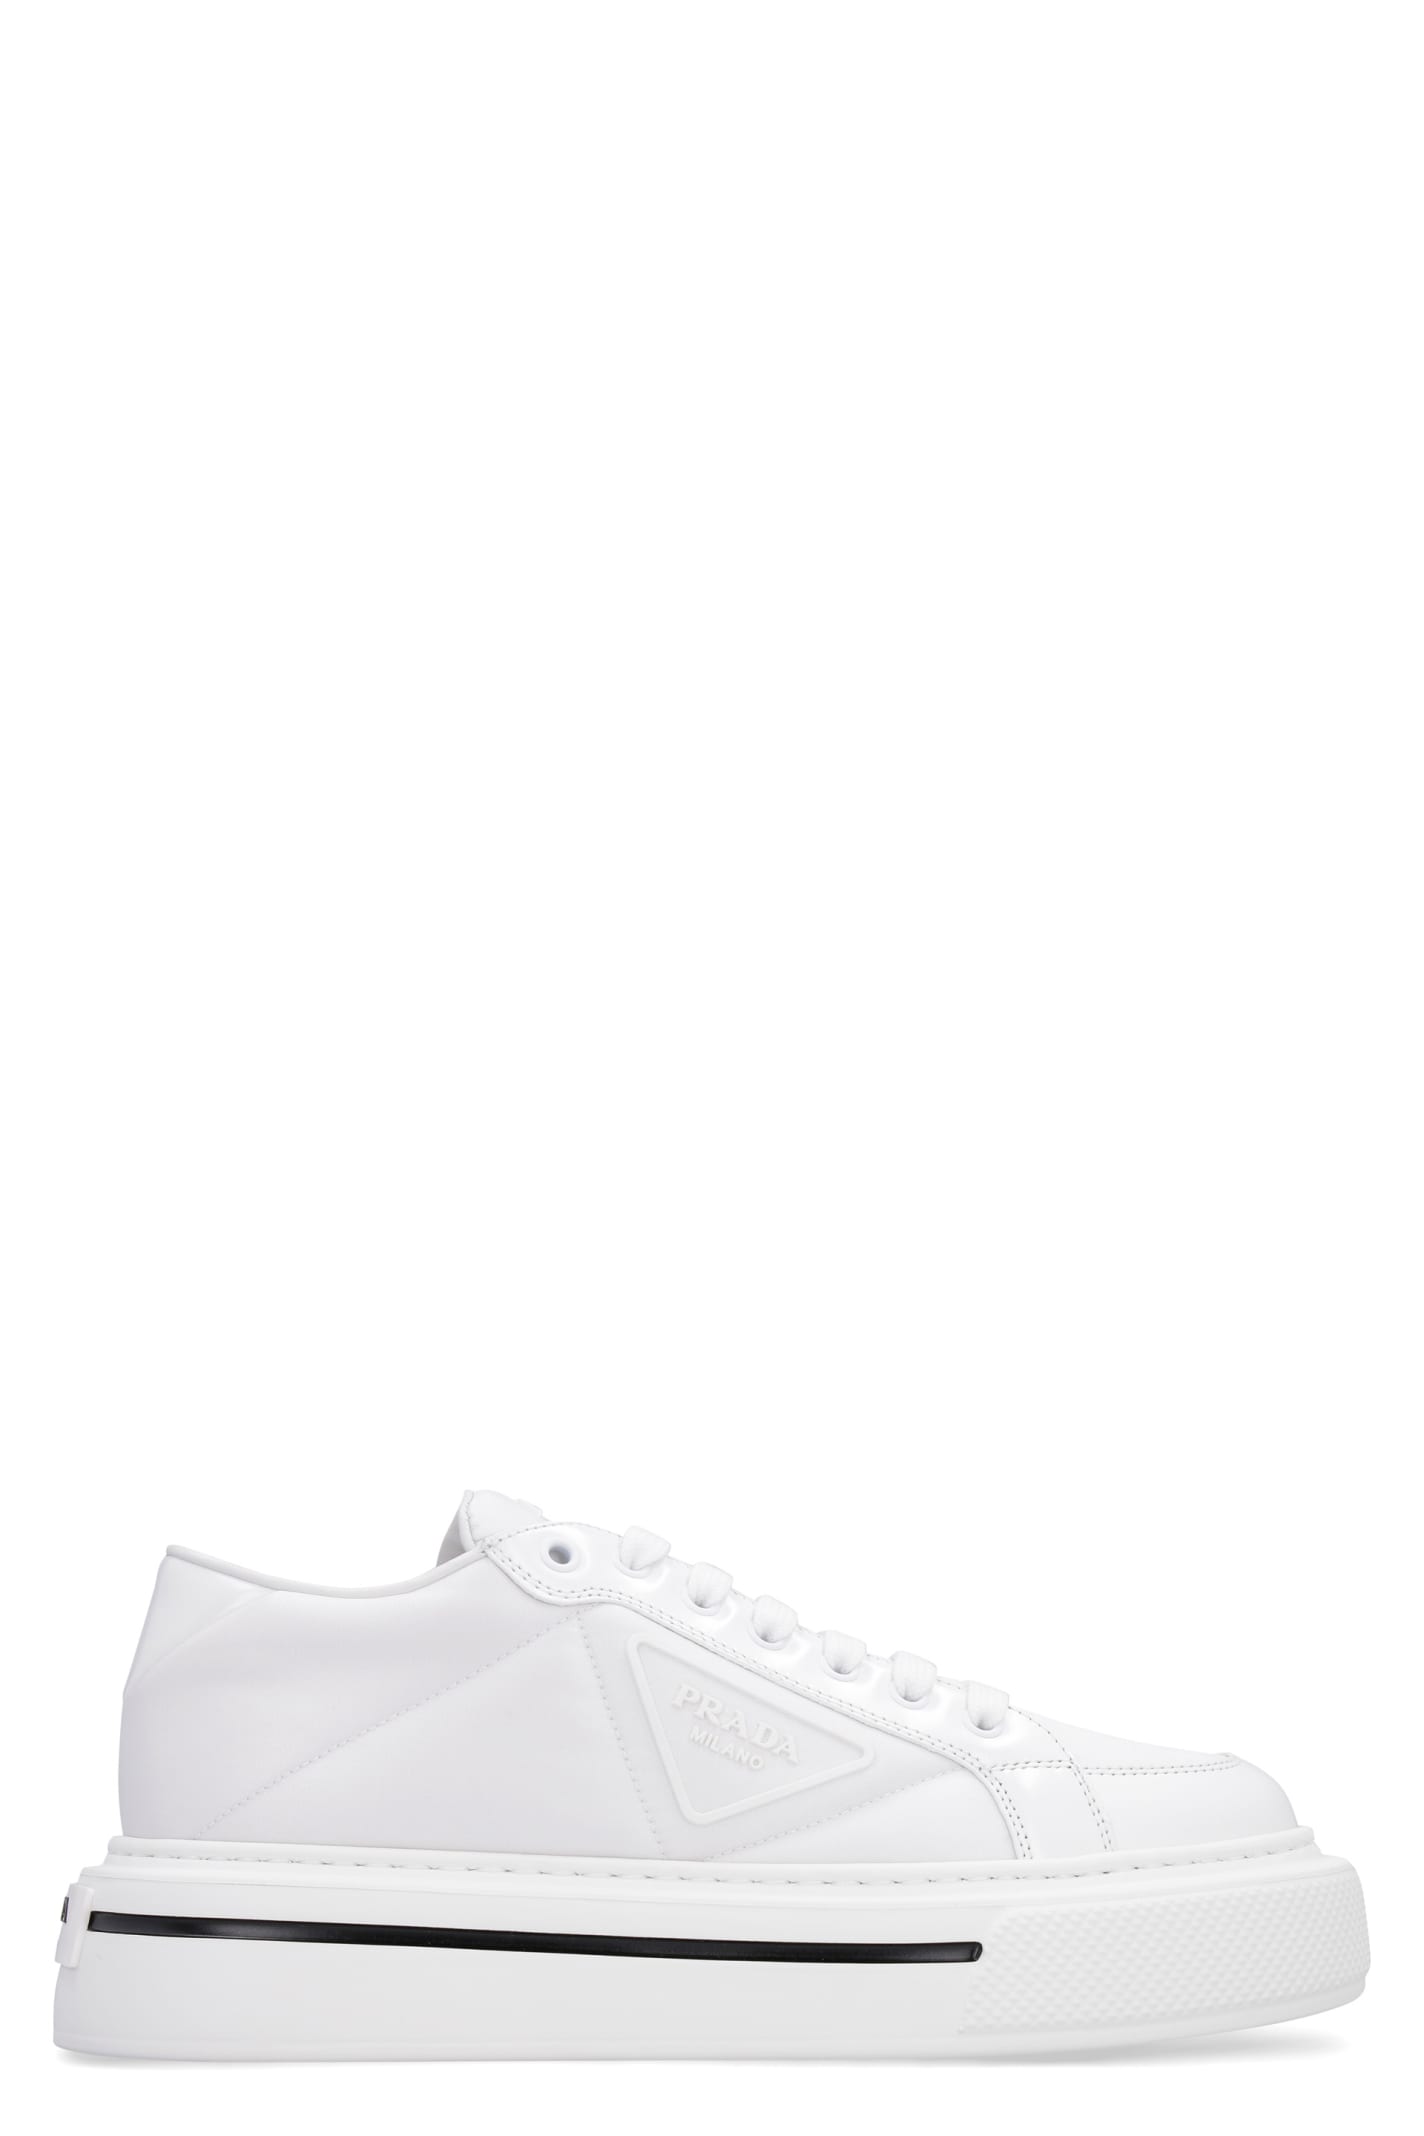 Prada Techno-fabric And Leather Sneakers